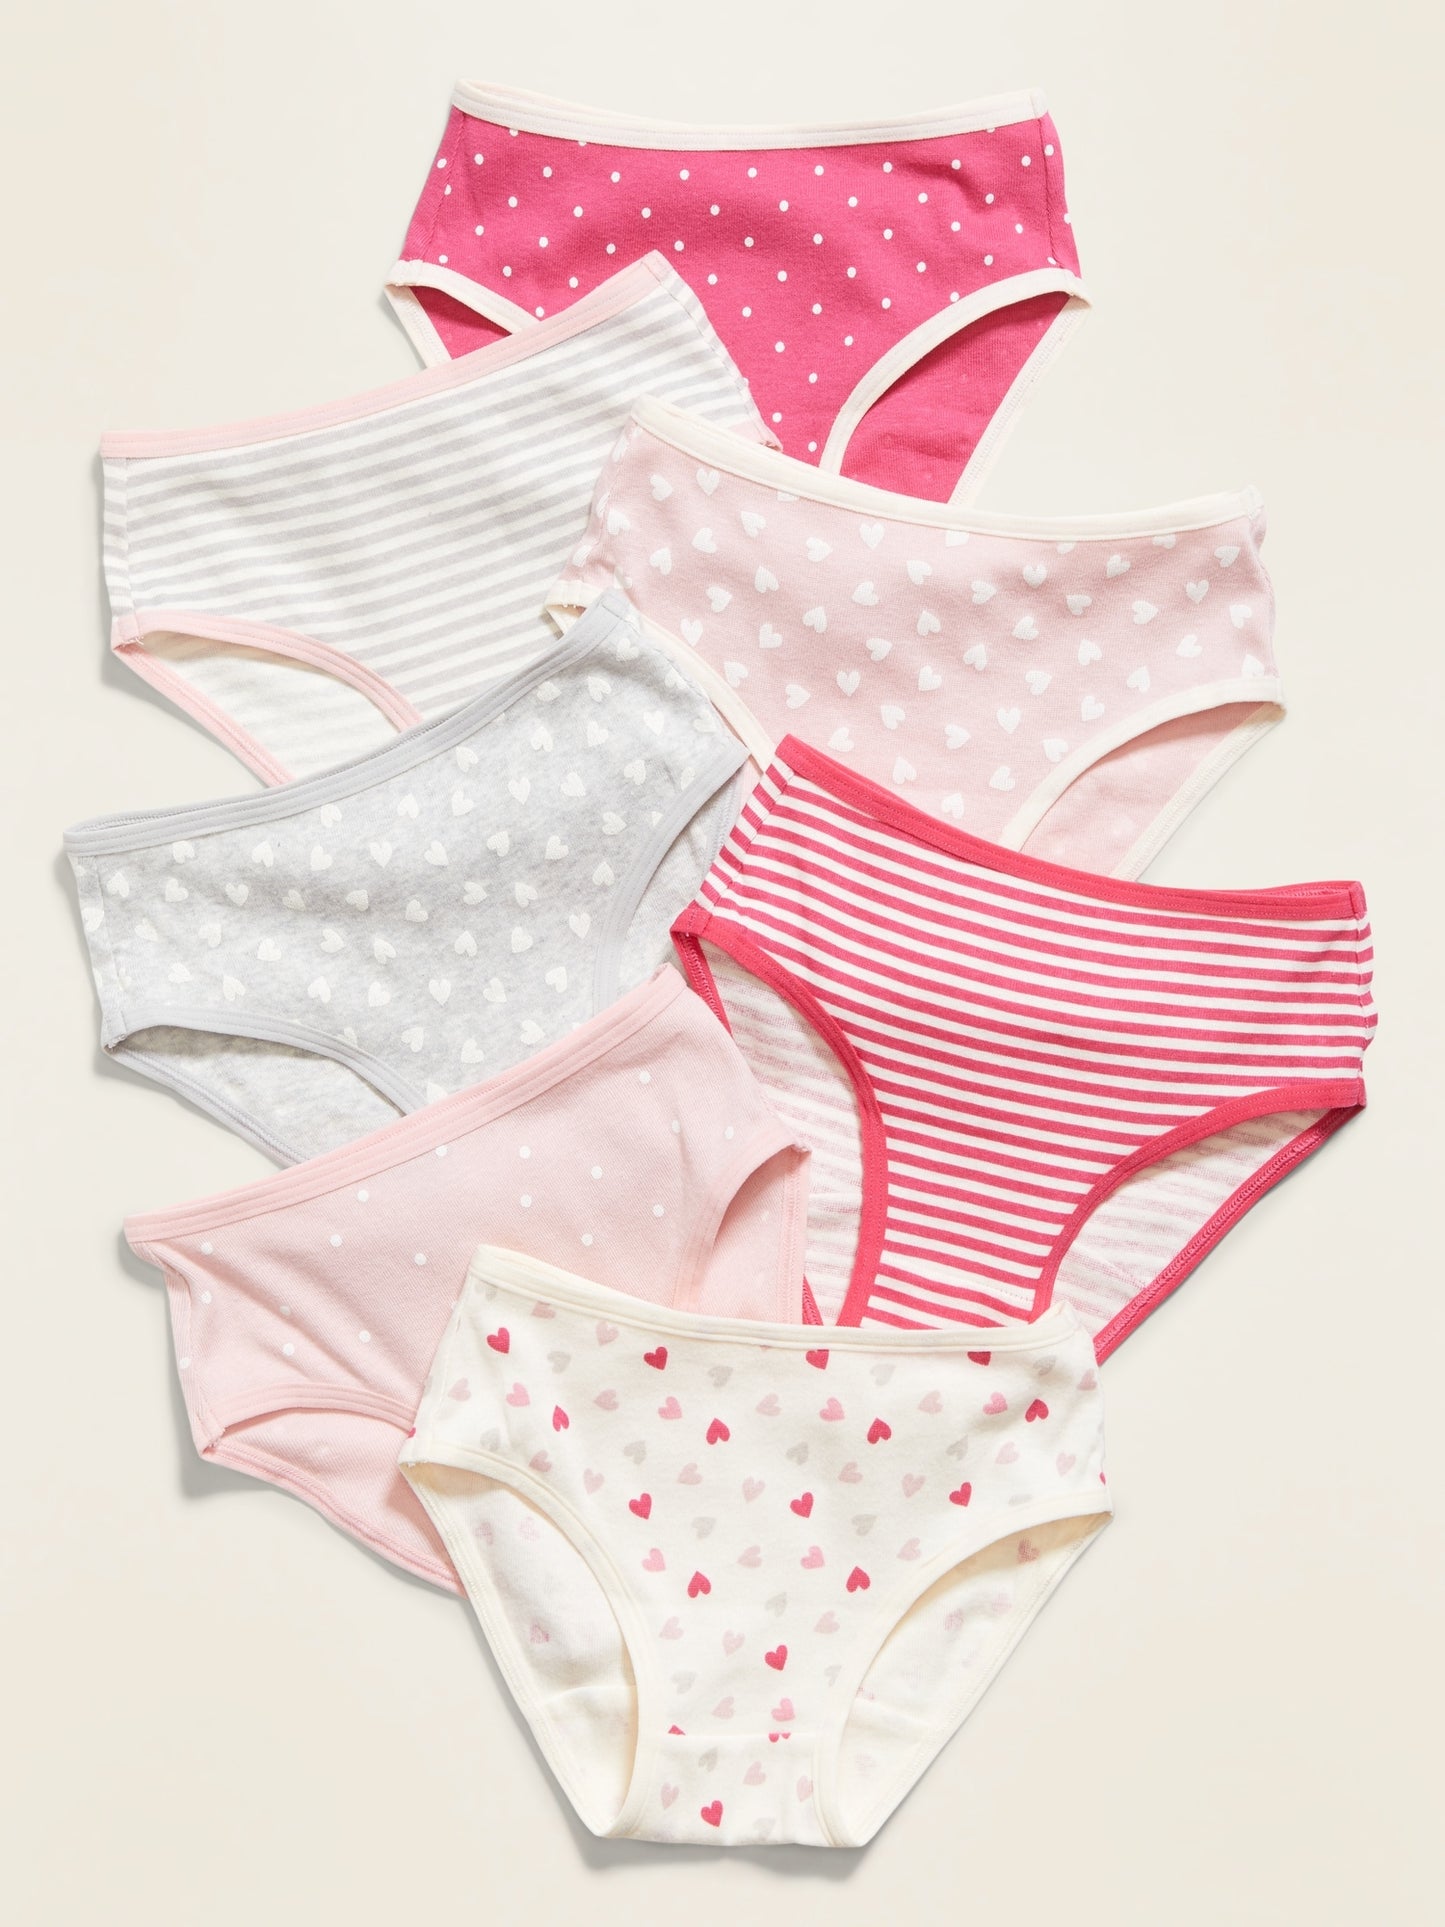 ON Patterned Underwear 7-Pack For Toddler Girls - Multi Hearts